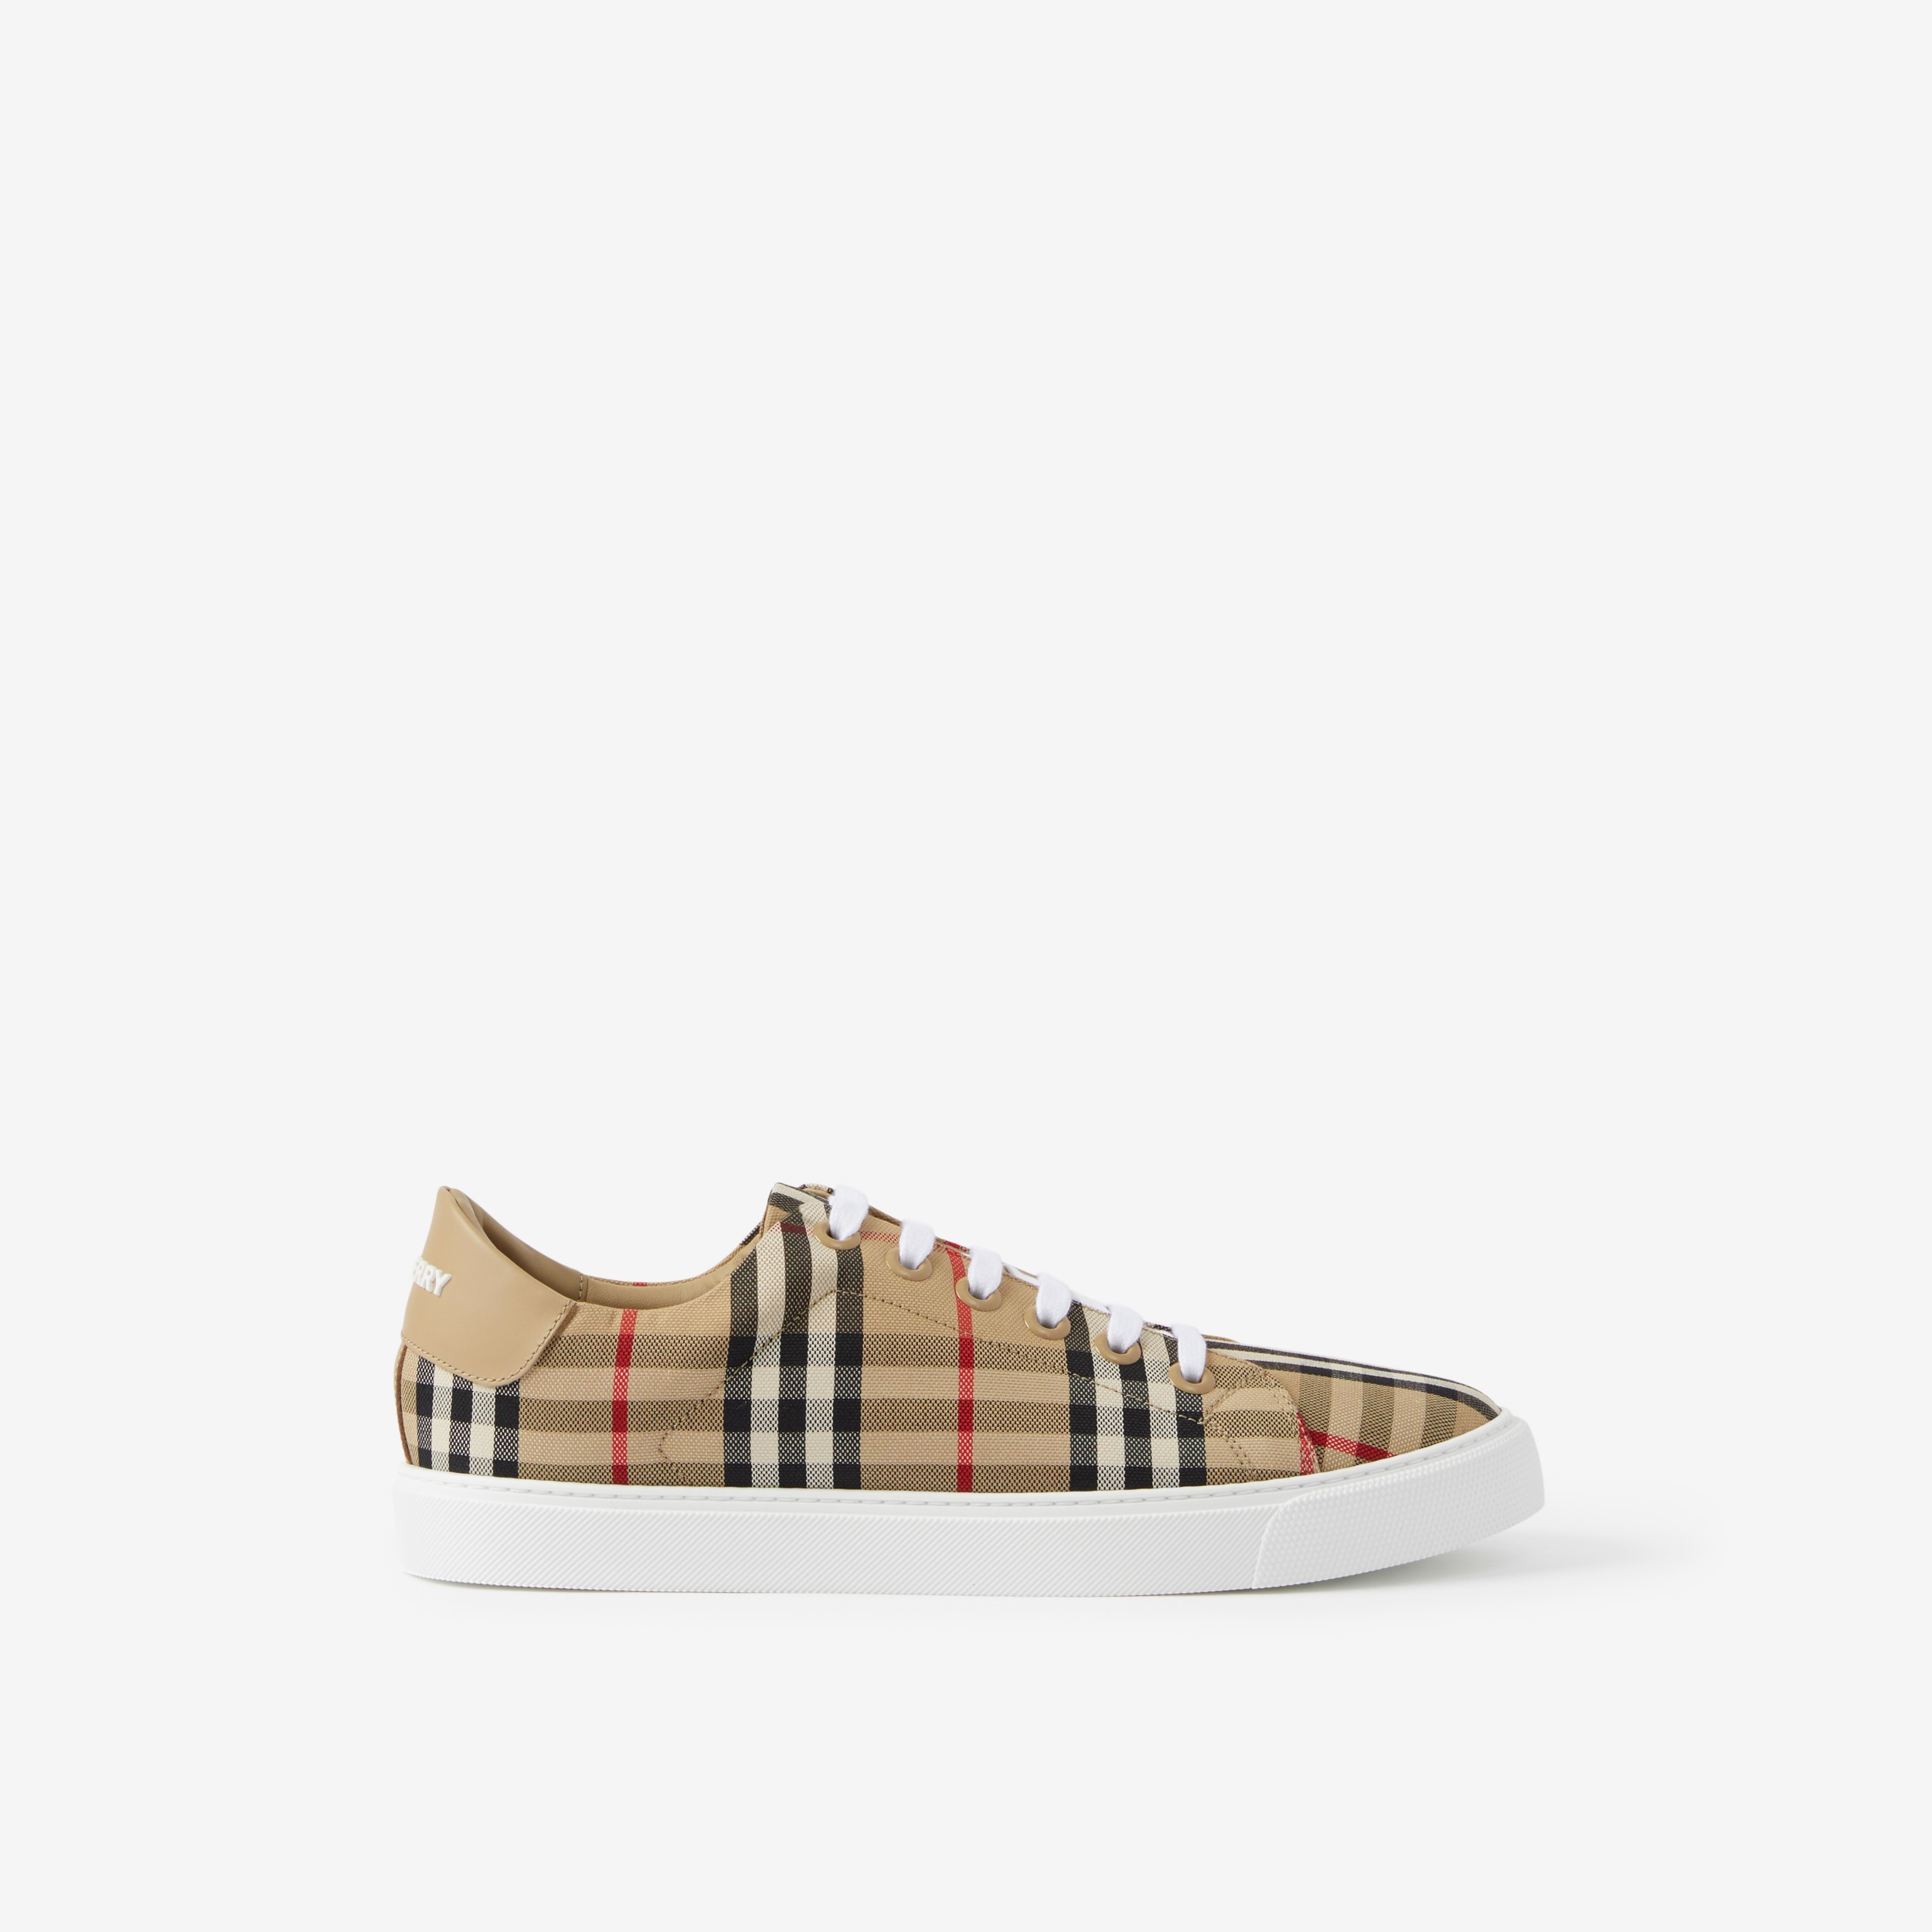 Rijp strottenhoofd slogan Vintage Check and Leather Sneakers in Archive Beige - Women | Burberry®  Official